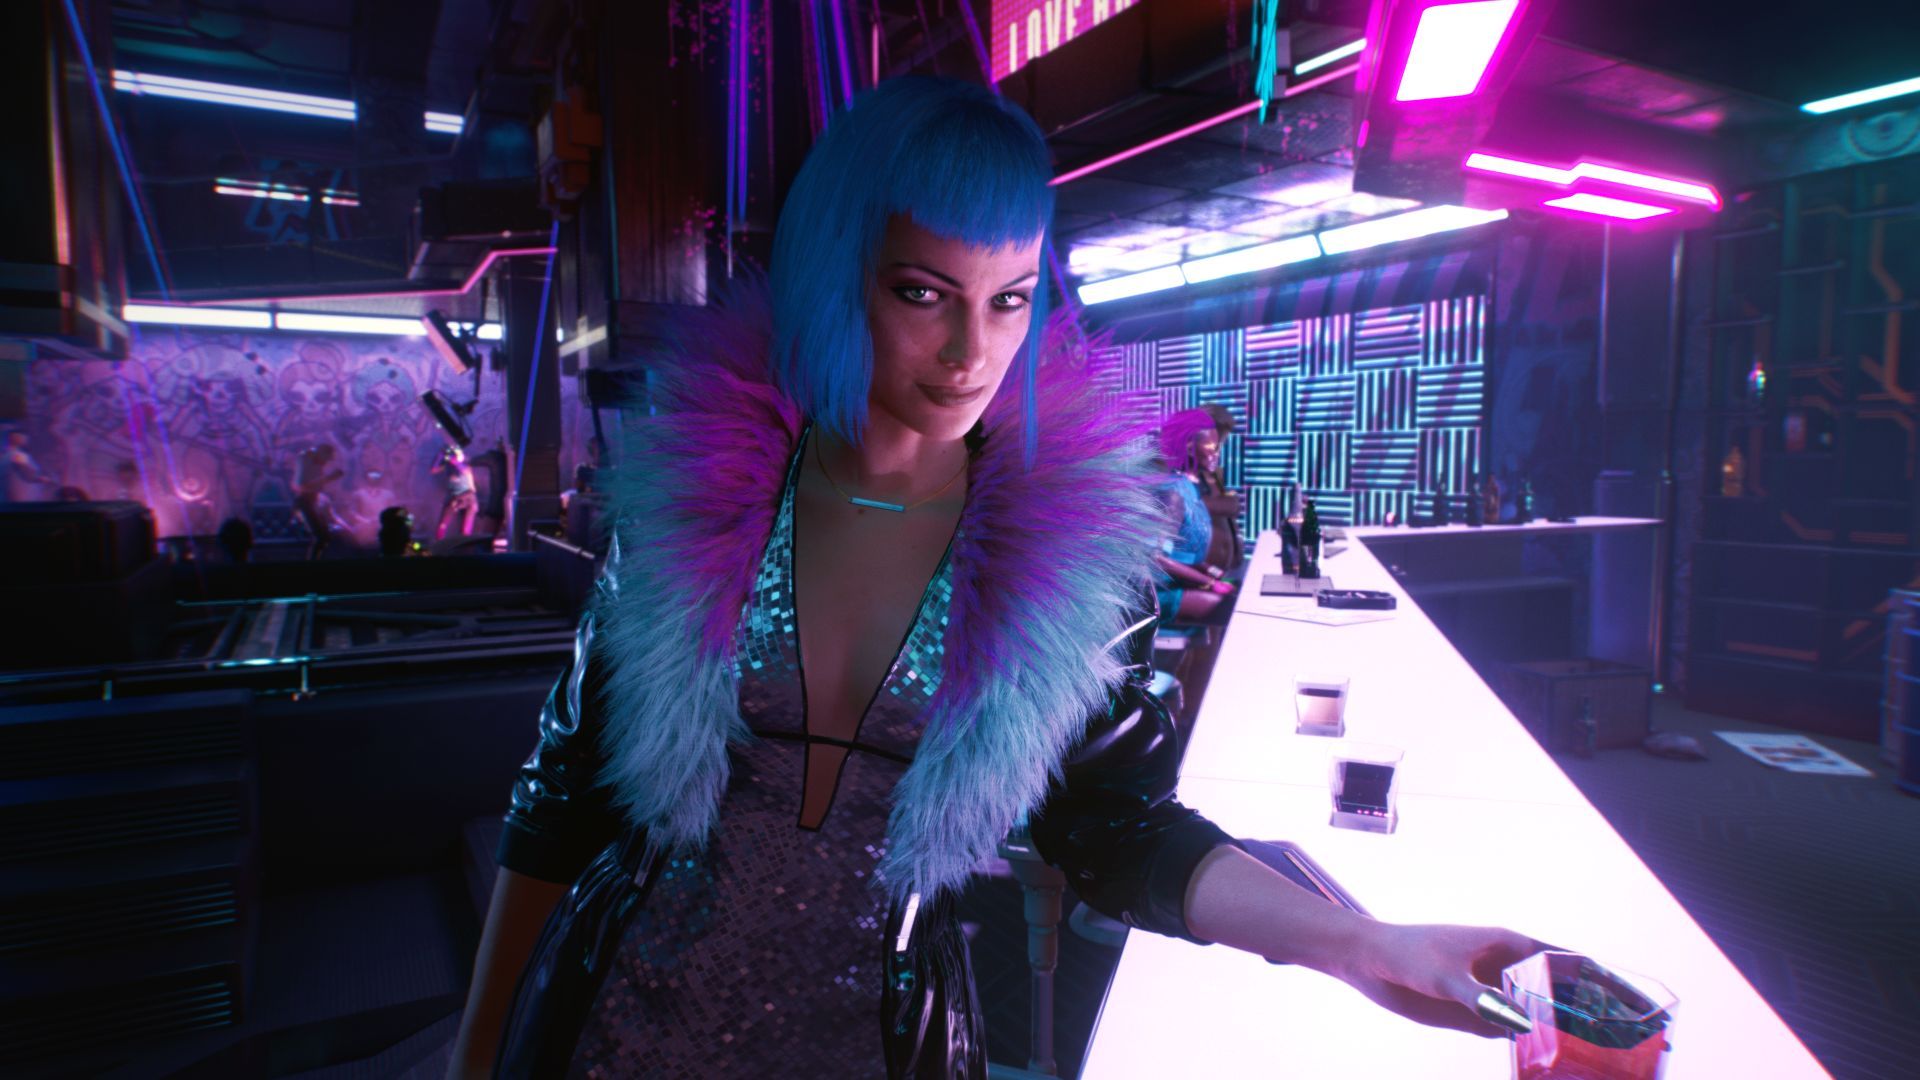 Cyberpunk 2077's new trailer gives most detailed look yet AU